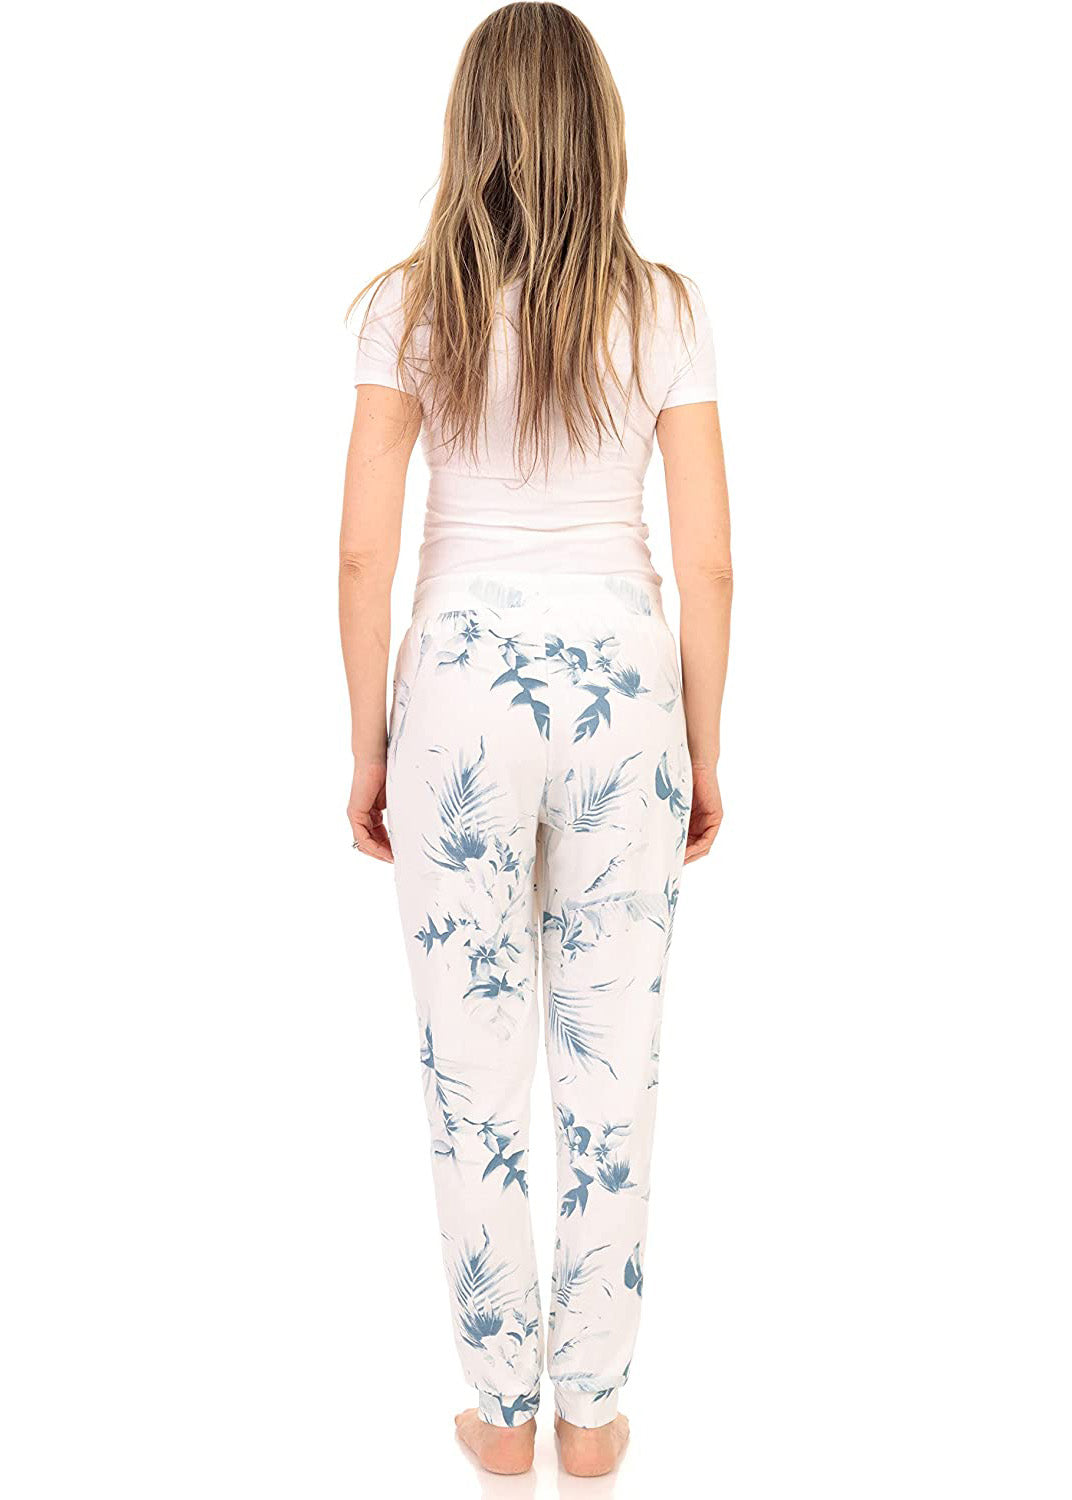 
                  
                    PJ joggers with soft velvety texture, stretch, elastic waistband, drawstring, and stylish ankle cuff. This pattern is very light blue, abstract patterns of leaves on off white fabric..
                  
                